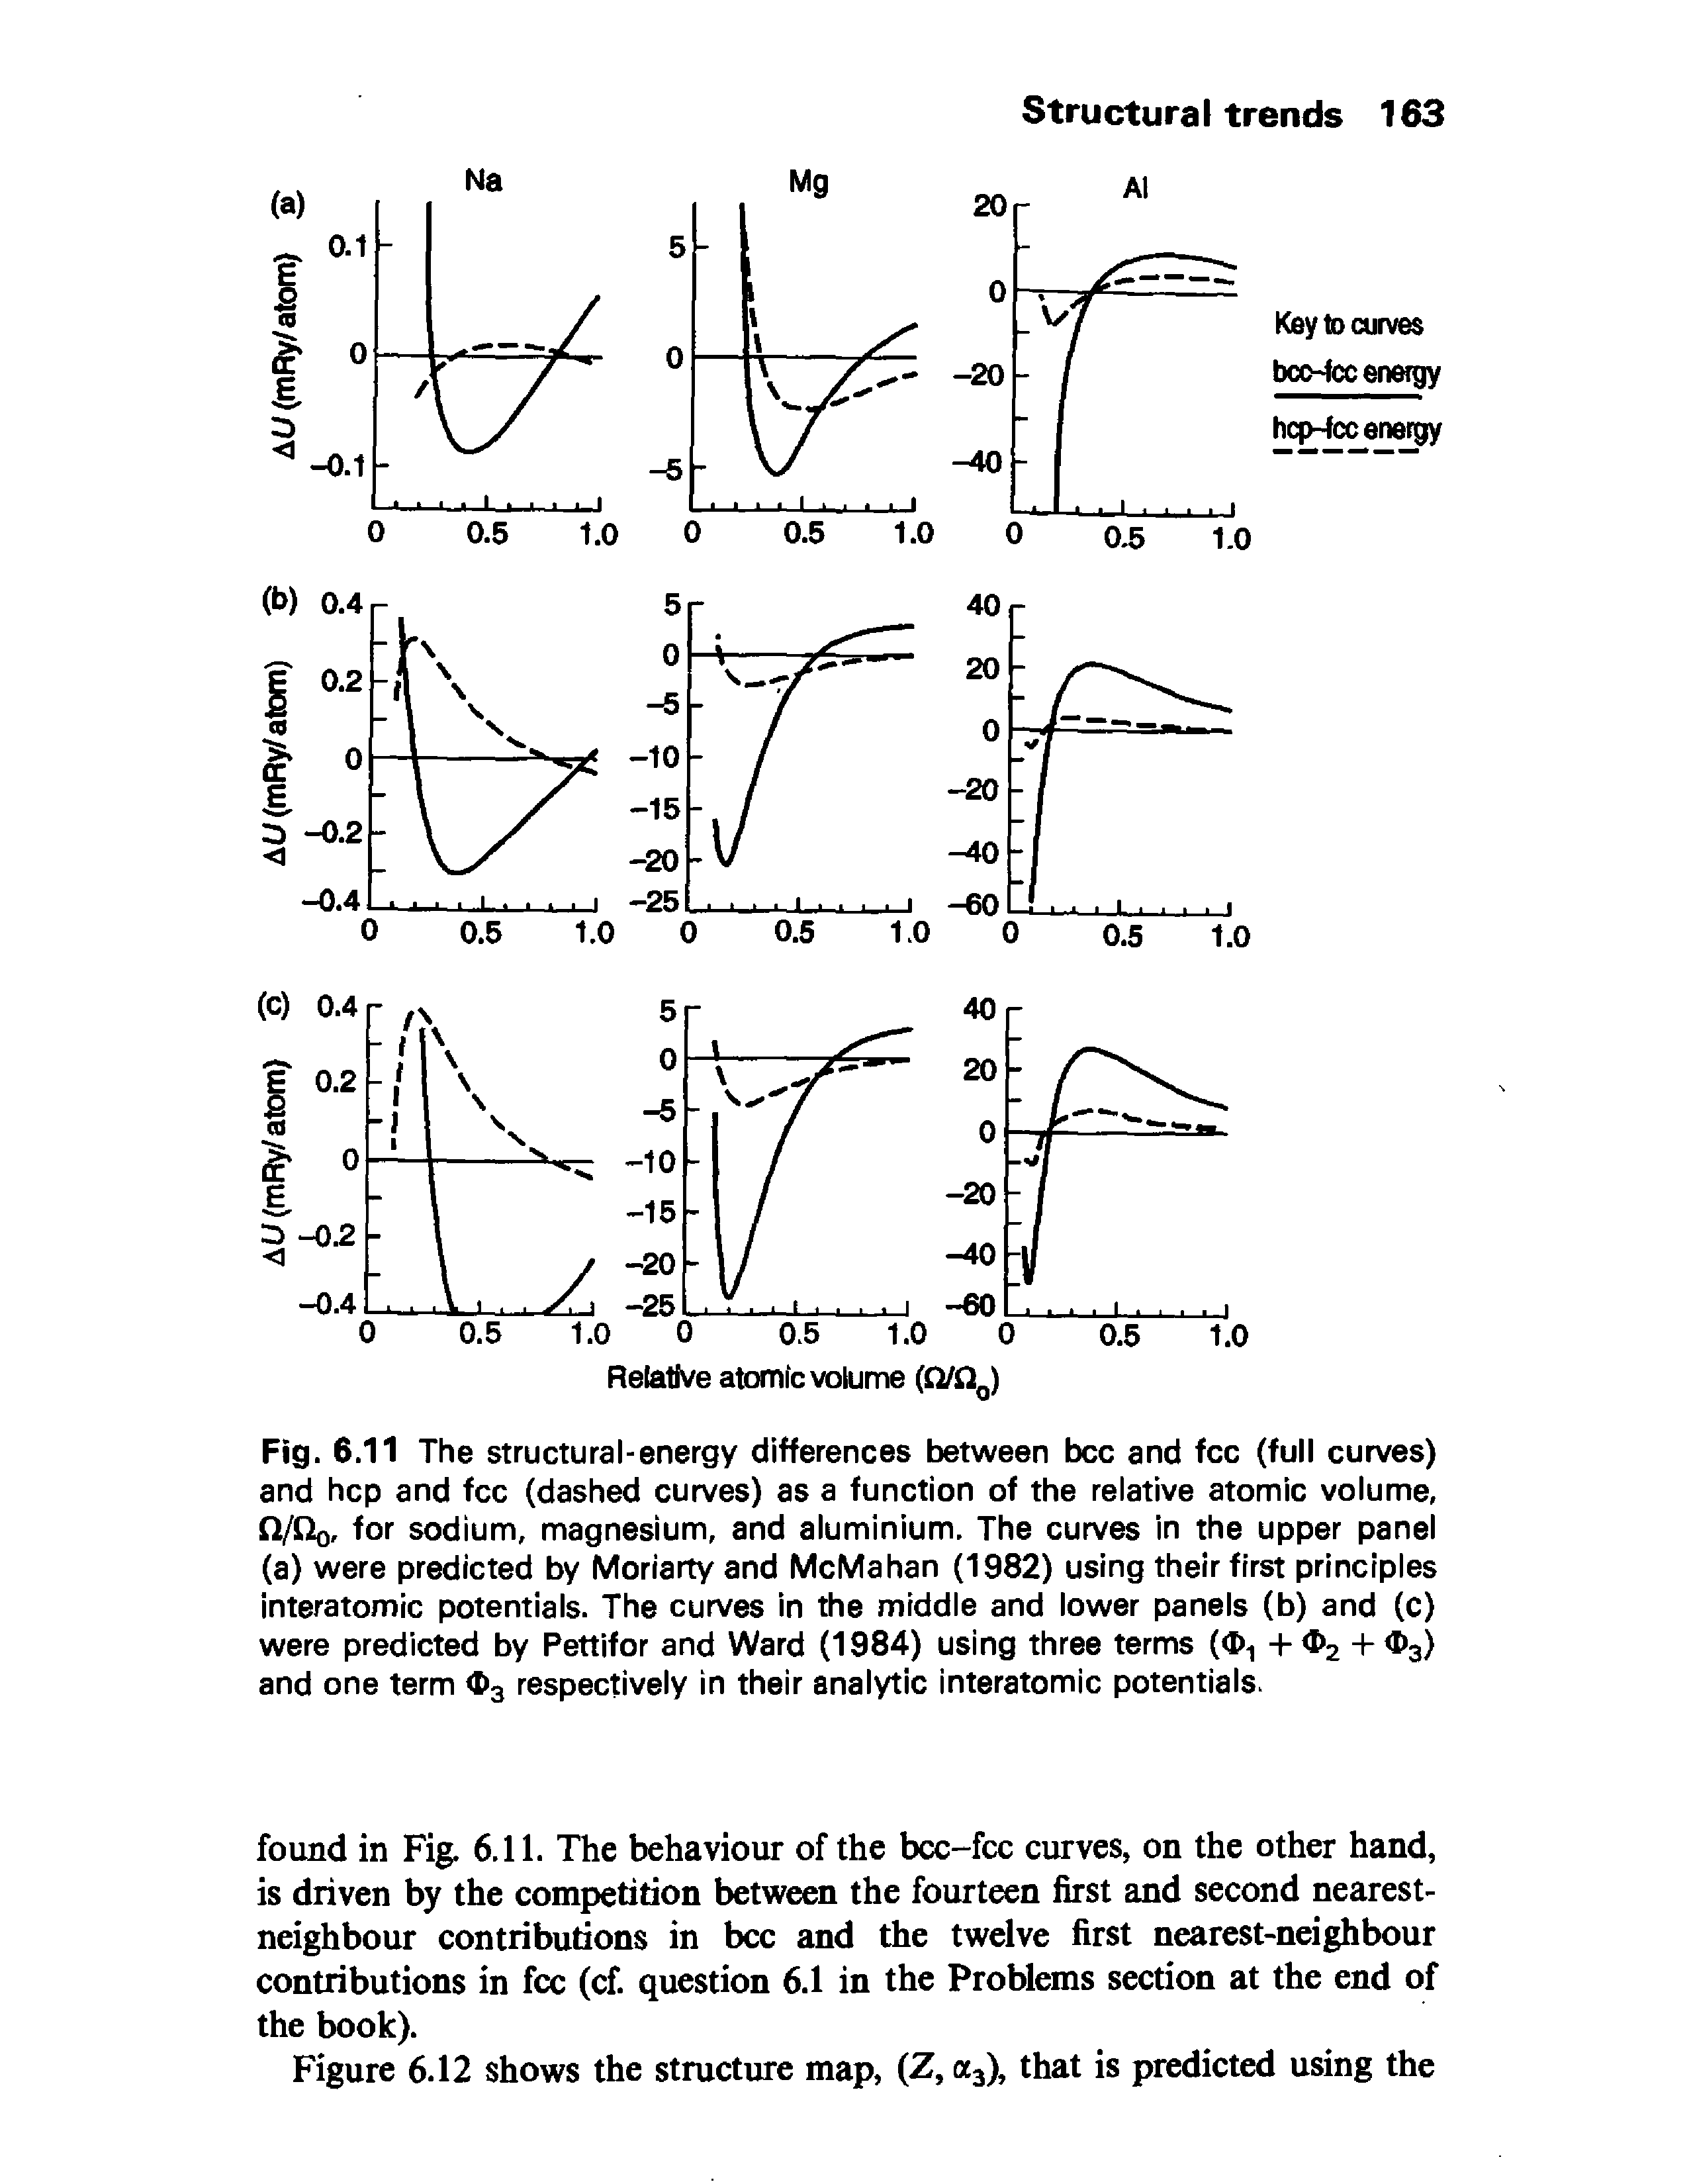 Fig. 6.11 The structural-energy differences between bcc and fee (full curves) and hep and fee (dashed curves) as a function of the relative atomic volume, fl/Q f°r sodium, magnesium, and aluminium. The curves in the upper panel (a) were predicted by Moriarty and McMahan (1982) using their first principles interatomic potentials. The curves in the middle and lower panels (b) and (c) were predicted by Pettifor and Ward (1984) using three terms (<1, + 2 + 3) and one term 3 respectively in their analytic interatomic potentials.